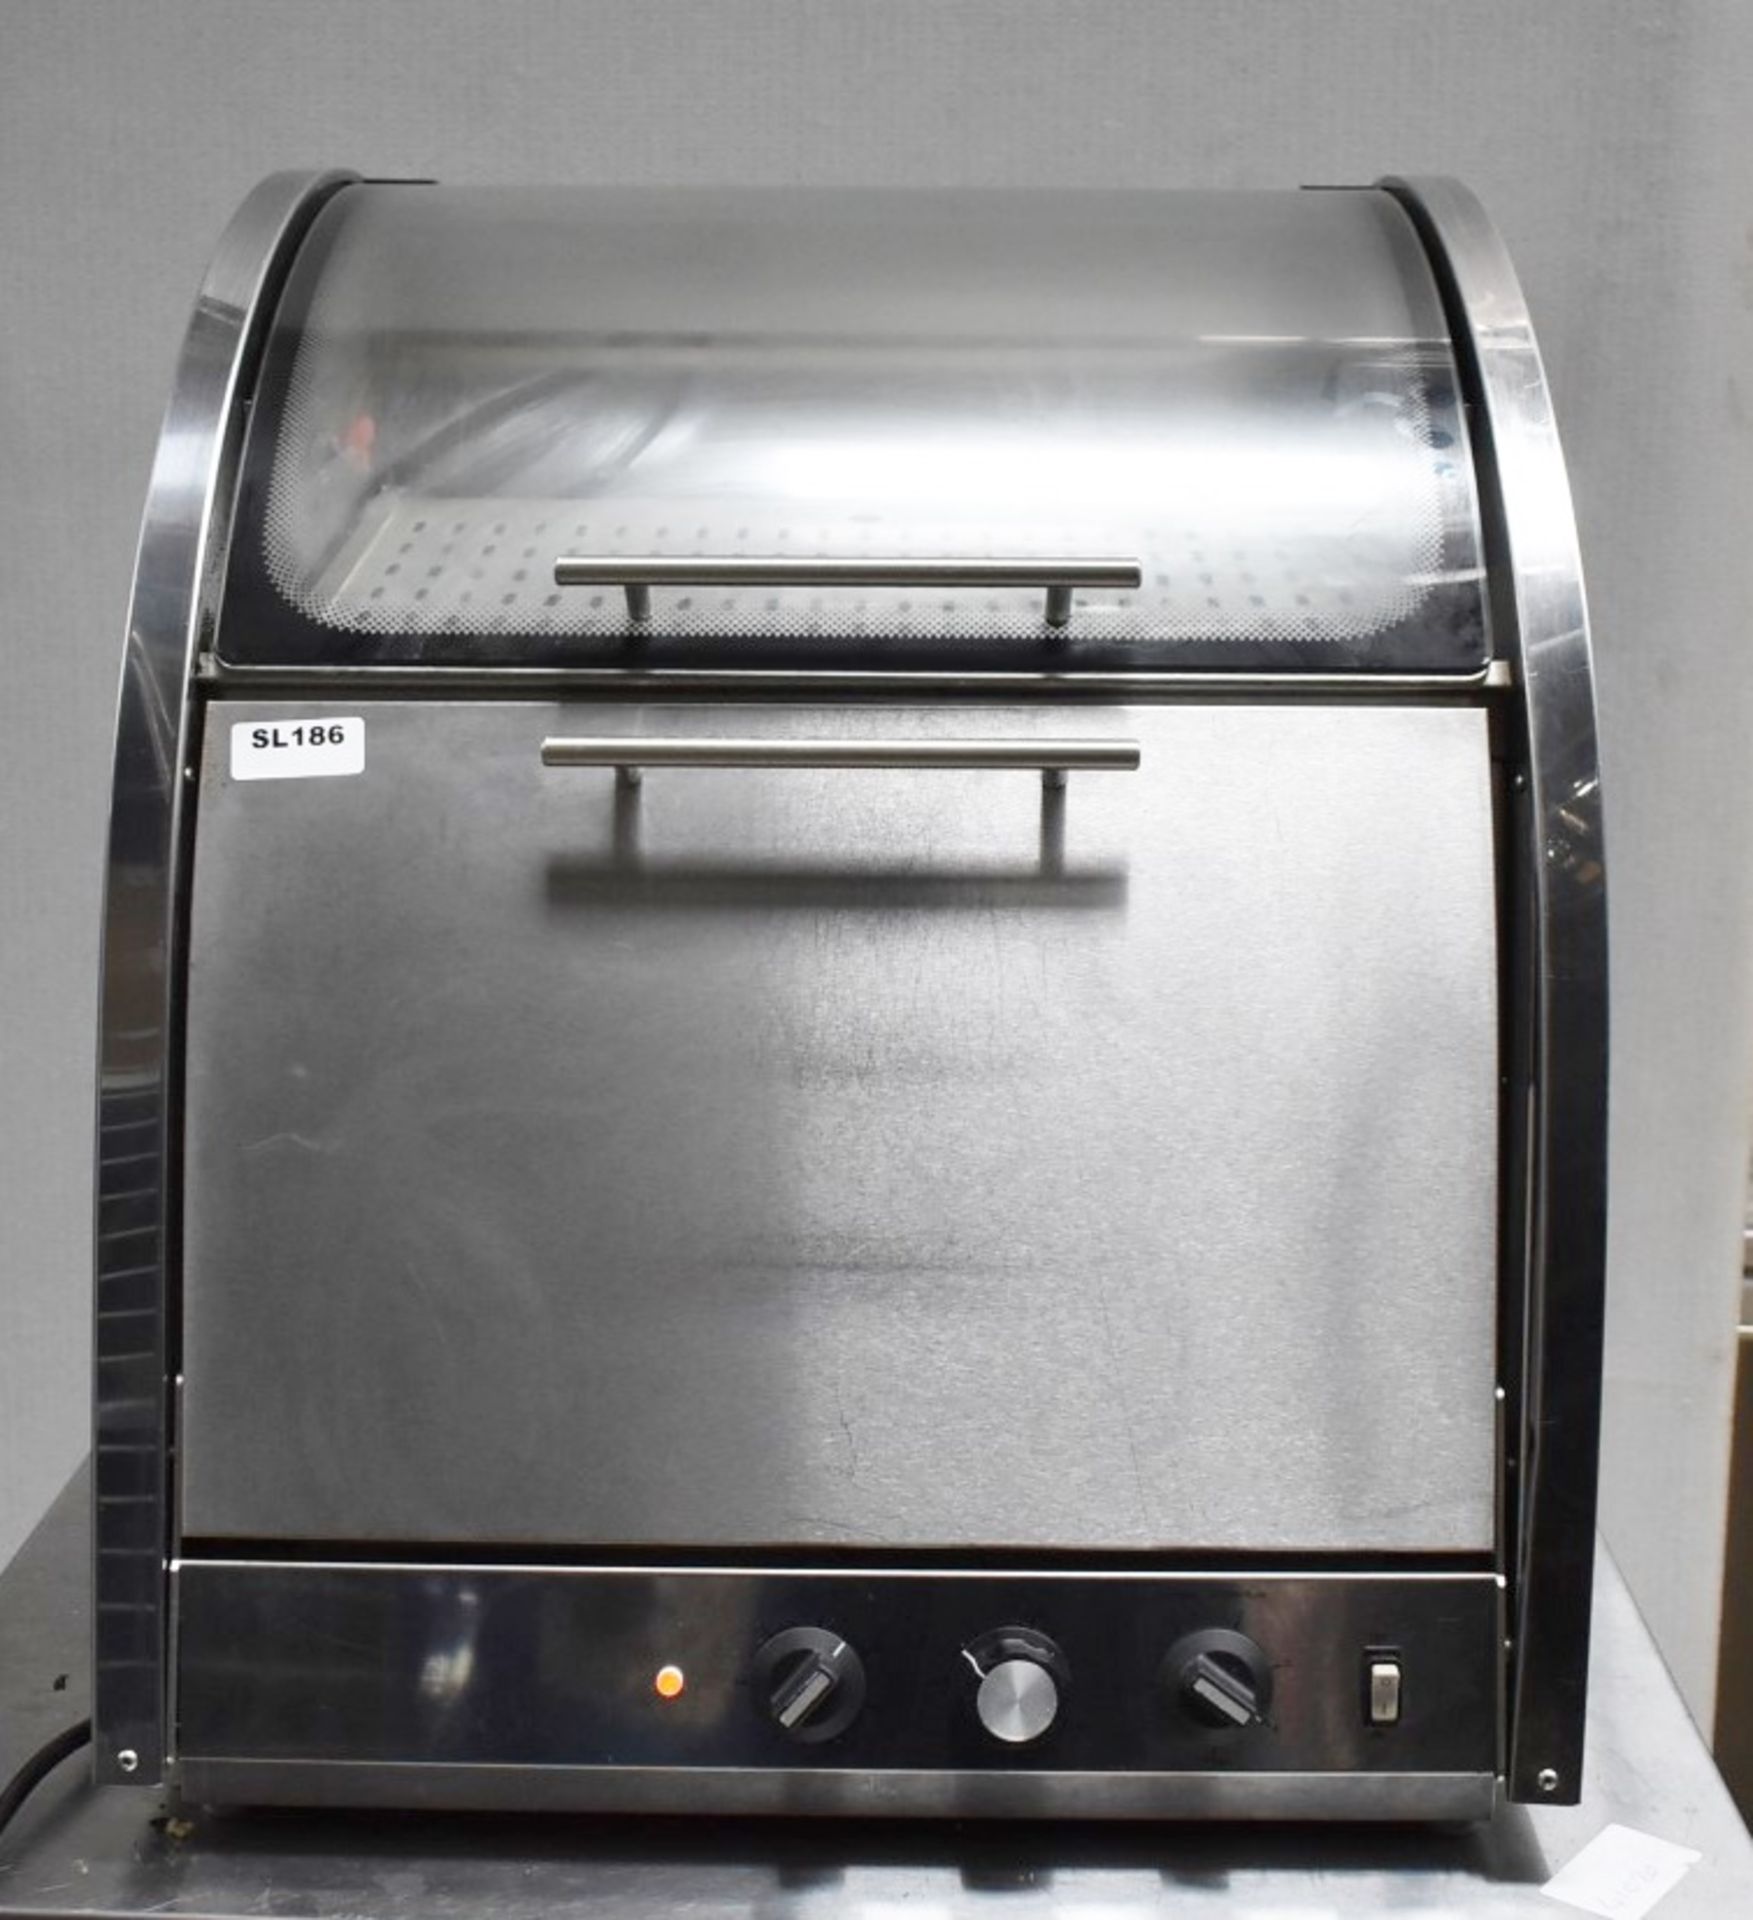 1 x Countertop Oven With Food Warmer Display - Dimensions: H63 x W55 x D56 cms - Recently Removed - Image 2 of 14